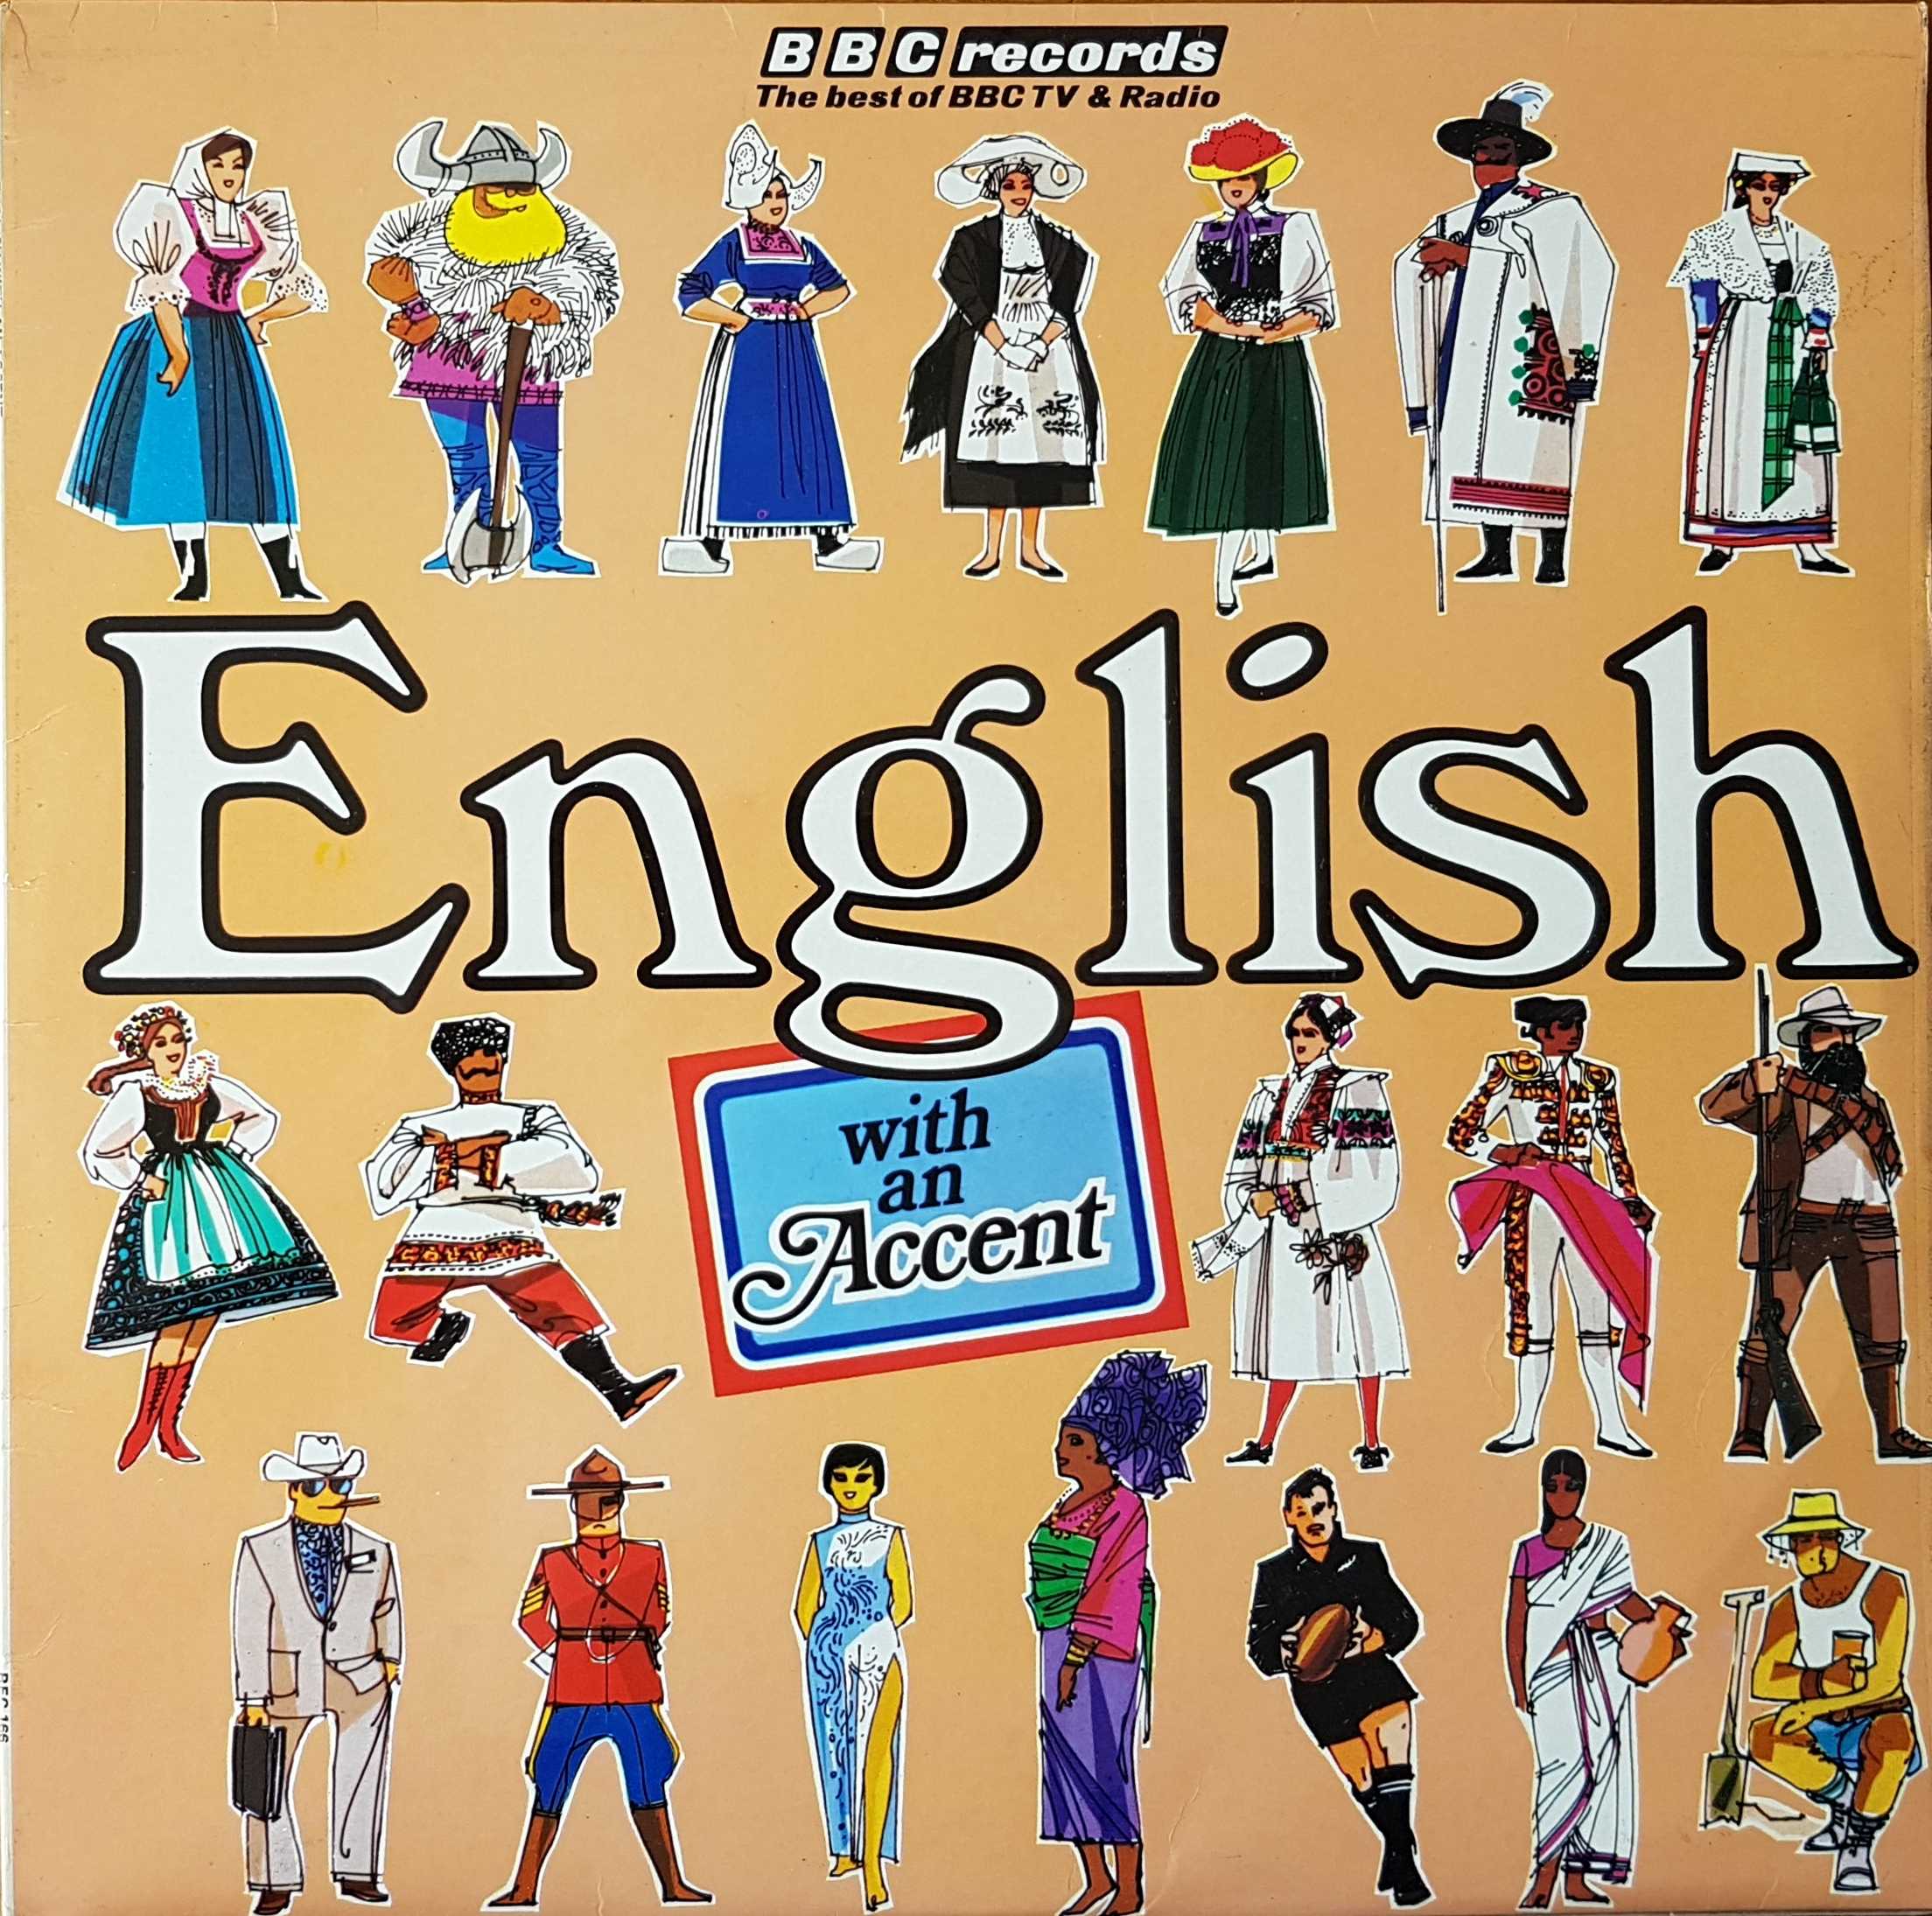 Picture of REC 166 English with an accent by artist Various from the BBC albums - Records and Tapes library